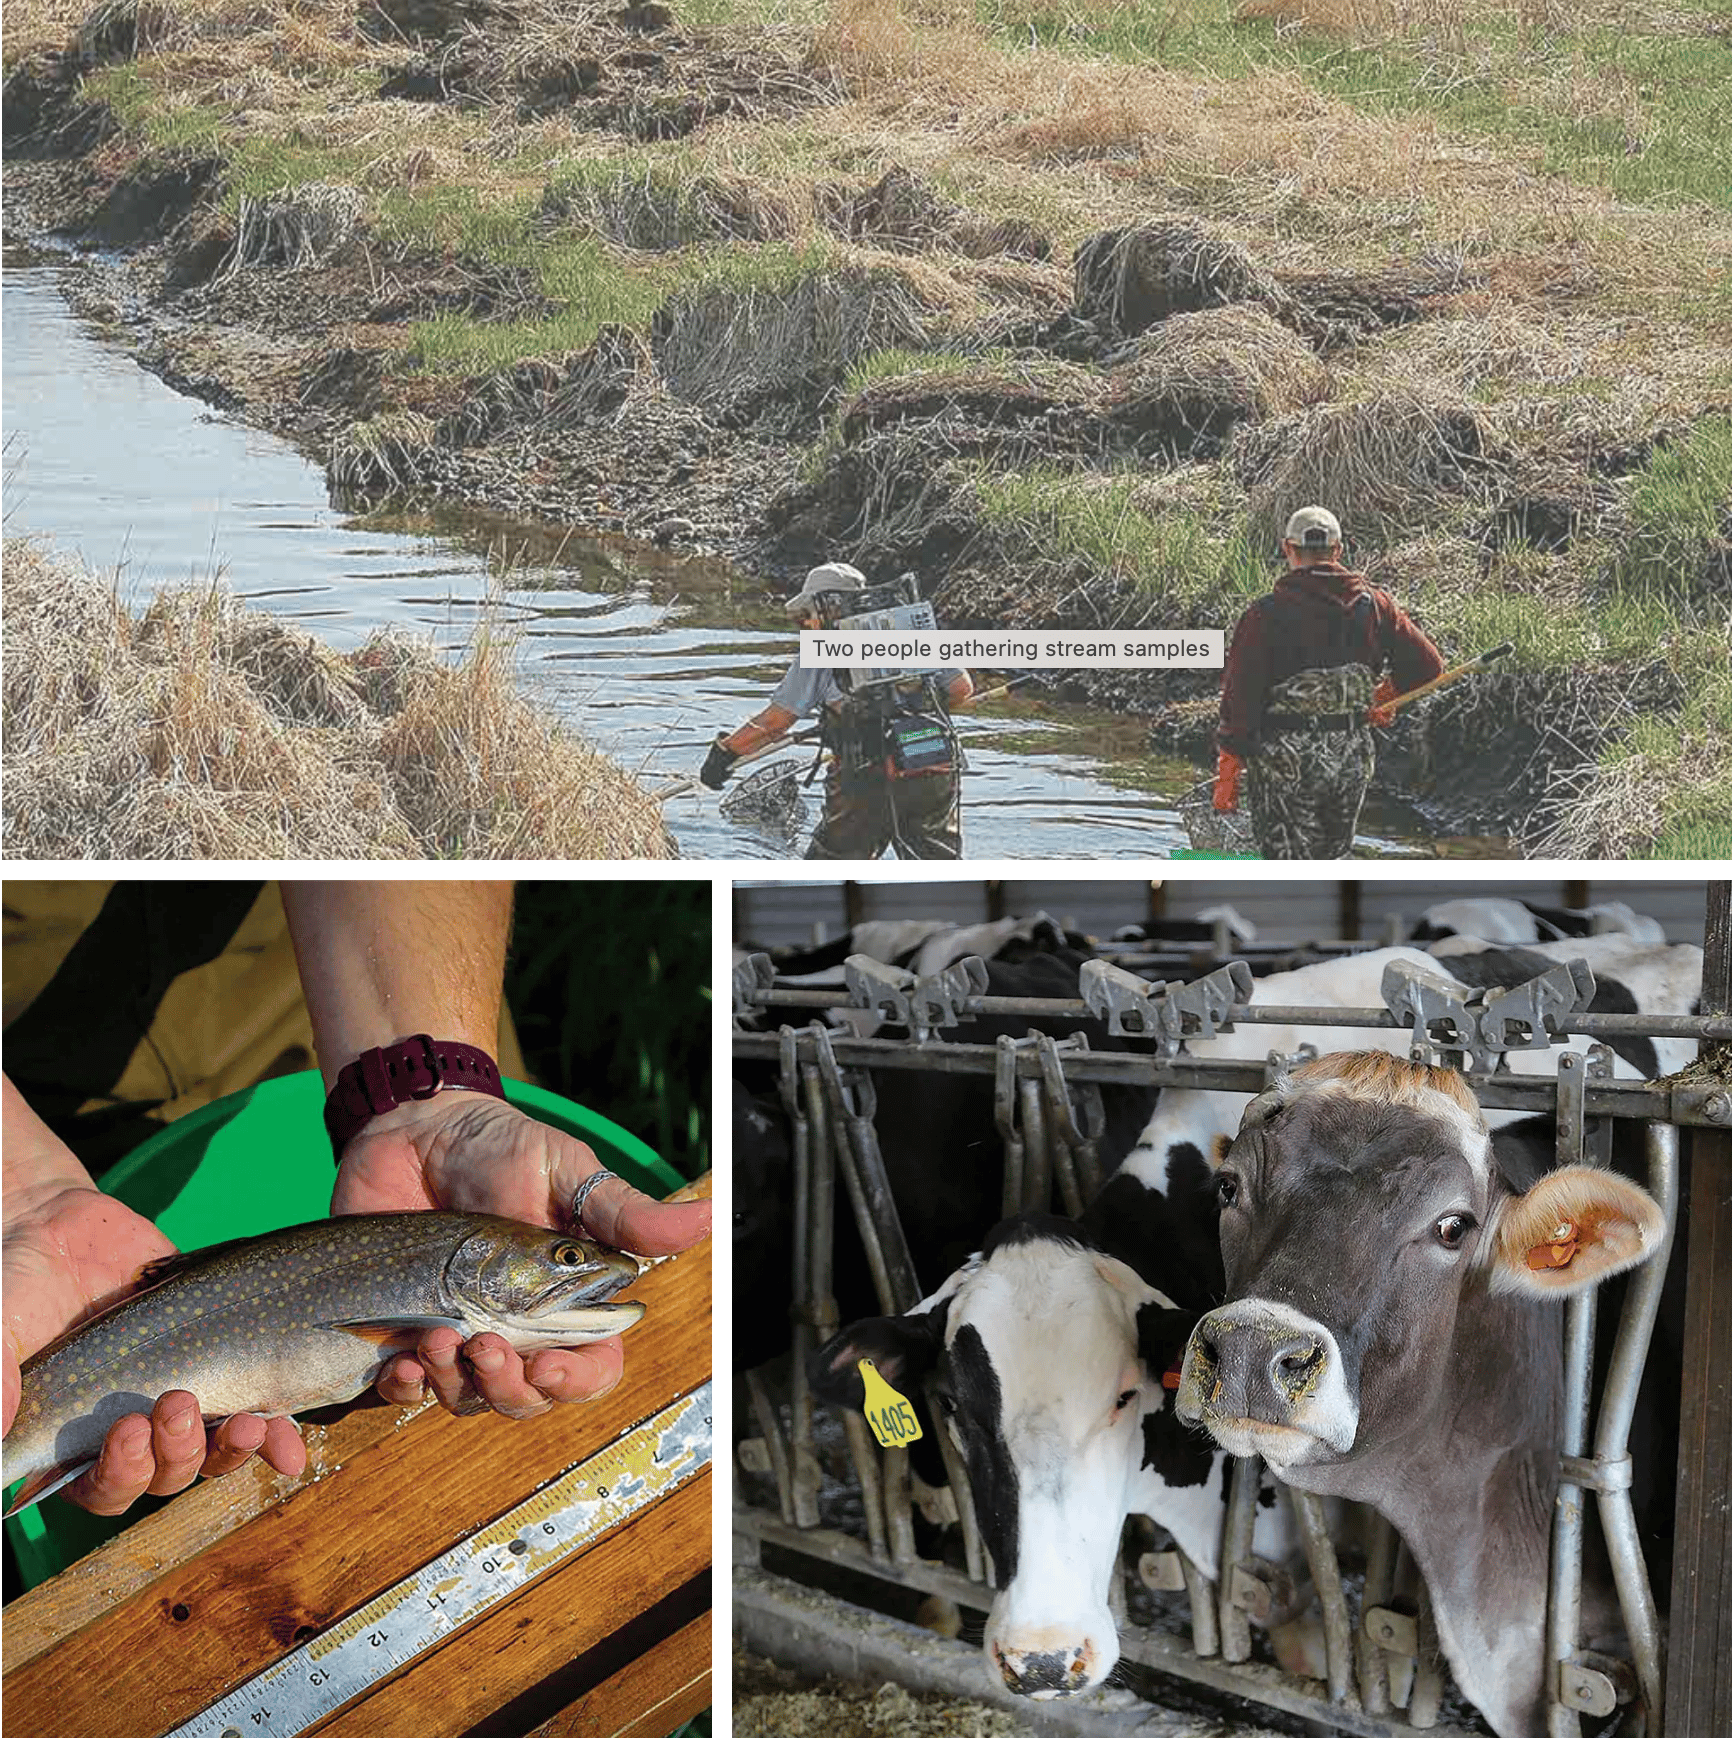 pling shows that brook trout are thriving in streams protected by conservation practices. Brilliantly colored South Pine brook trout are native to northeast Iowa. Dry cows and heifers enjoy comfort in a deep-pack bedded barn.